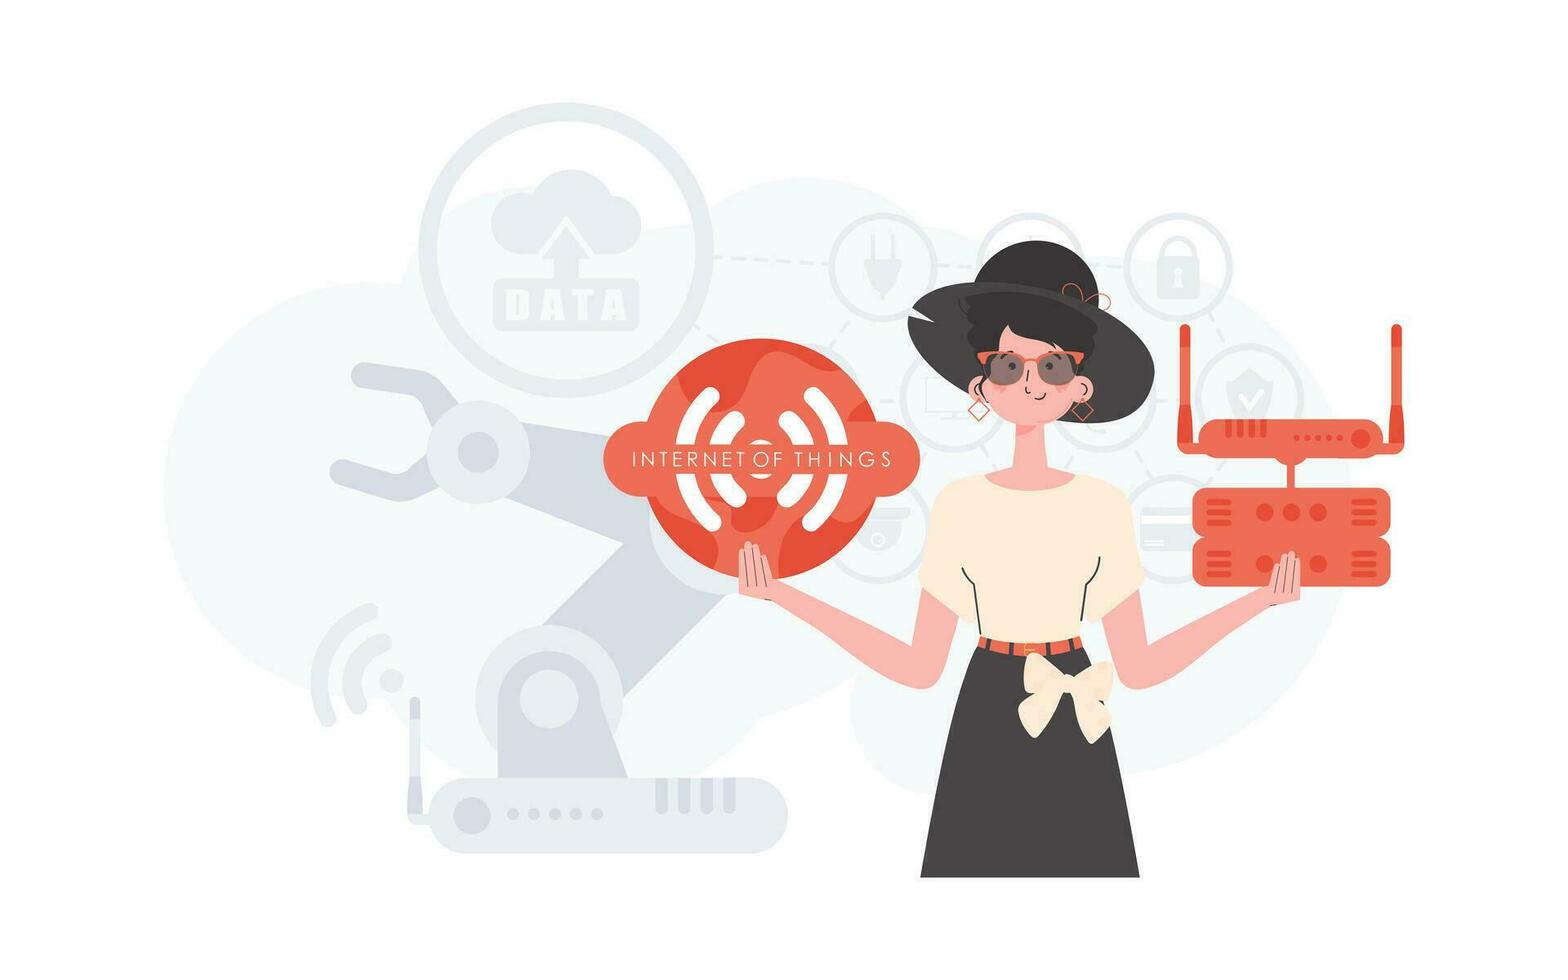 IoT concept. A woman holds the internet of things logo in her hands. Router and server. Good for presentations and websites. Vector illustration in flat style.